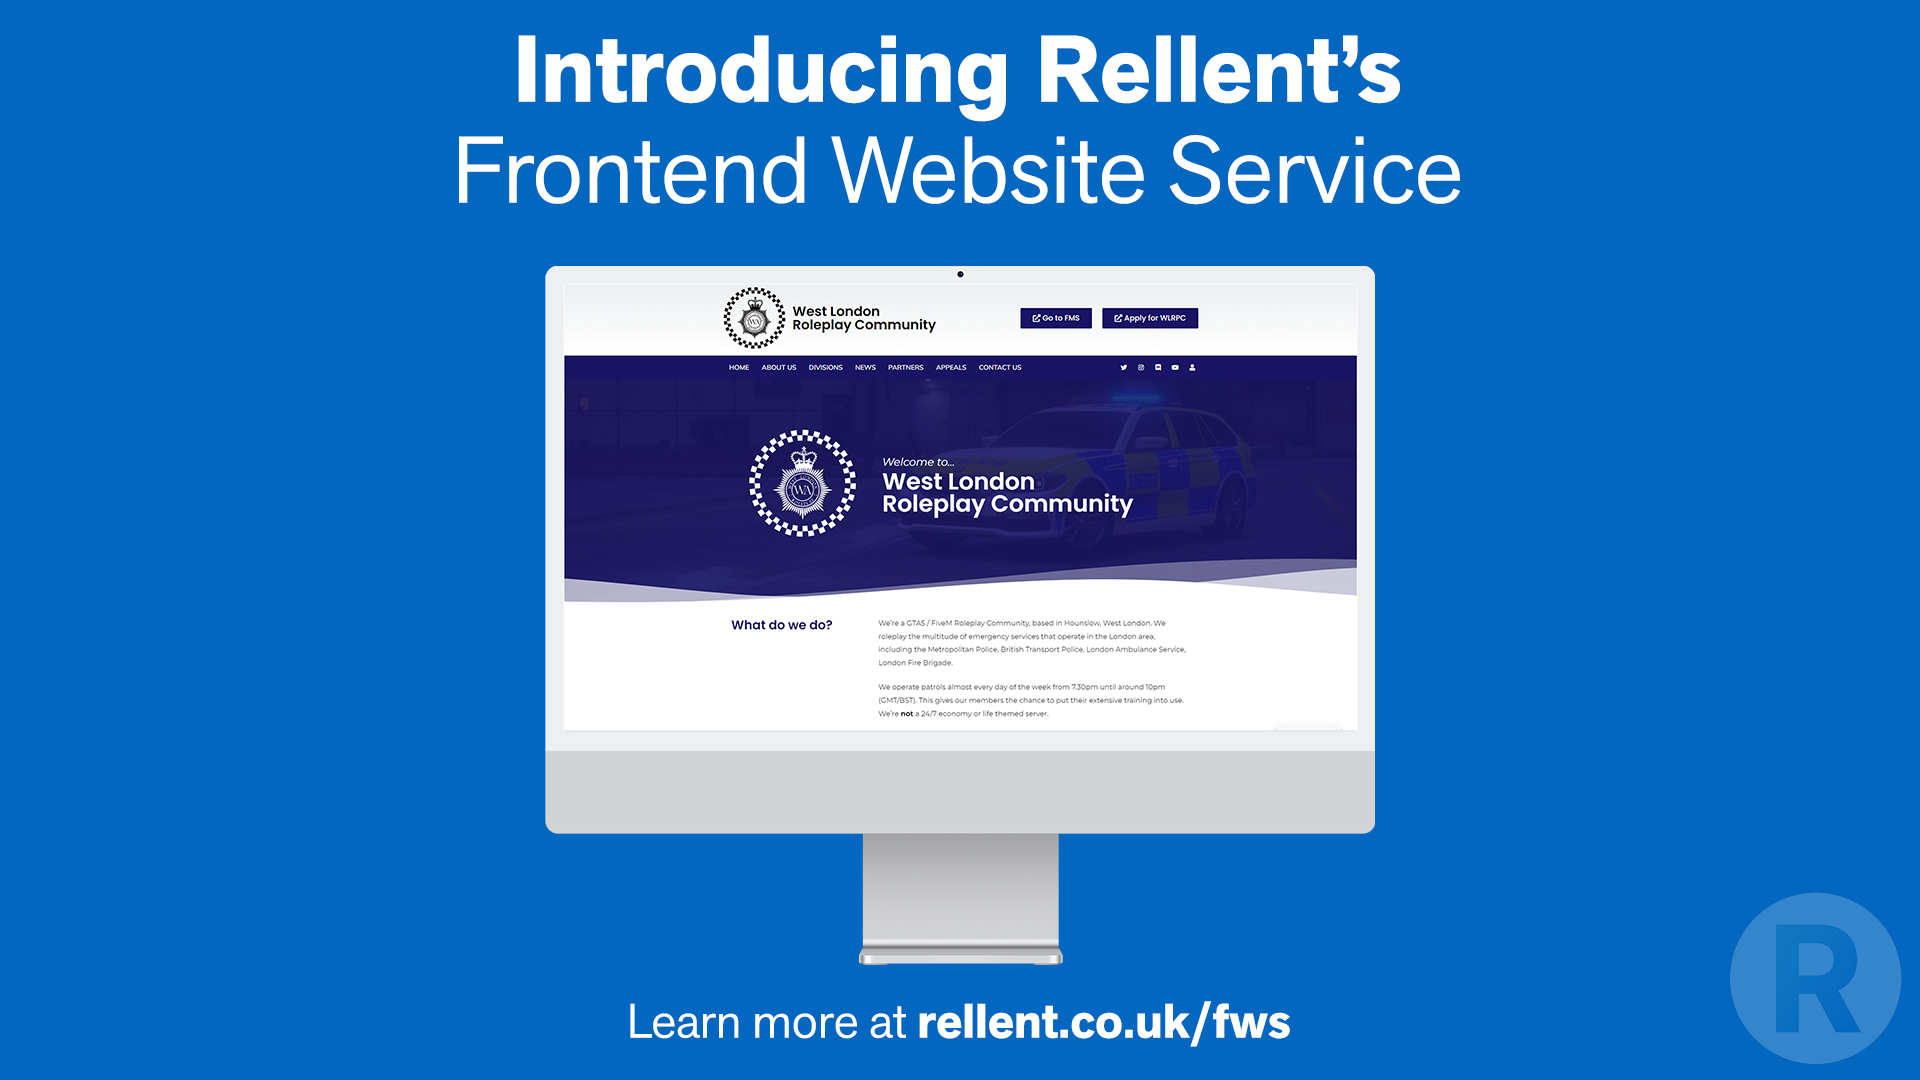 Our new Frontend Website Service